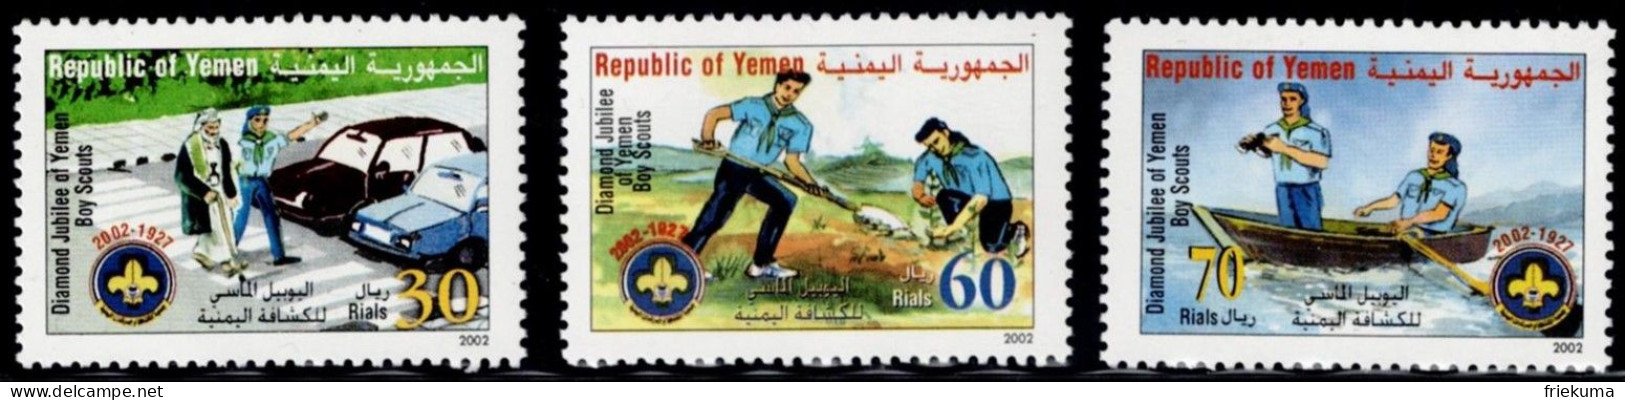 Republic Of Yemen 2002, Scout Helps Man Across The Road, They Plant Seedlings, They Sit In The Rowing Boat MiNr. 236-238 - Unused Stamps